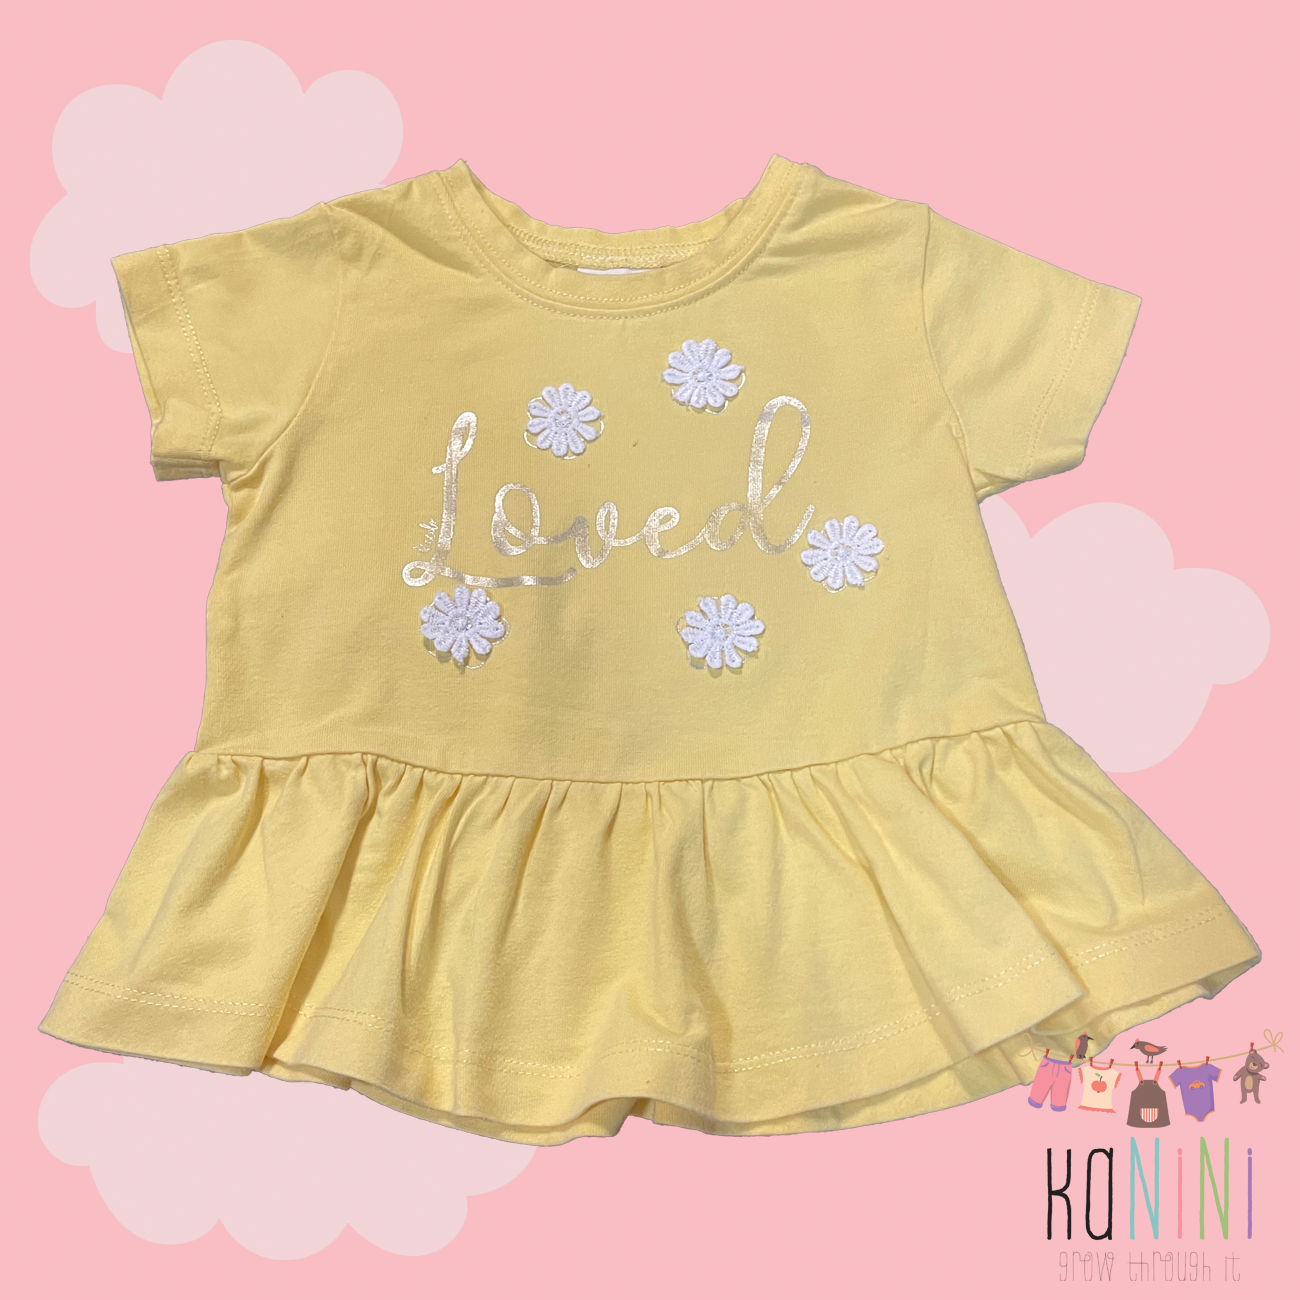 Featured image for “Keedo 6 - 12 Months Girls Yellow Top”